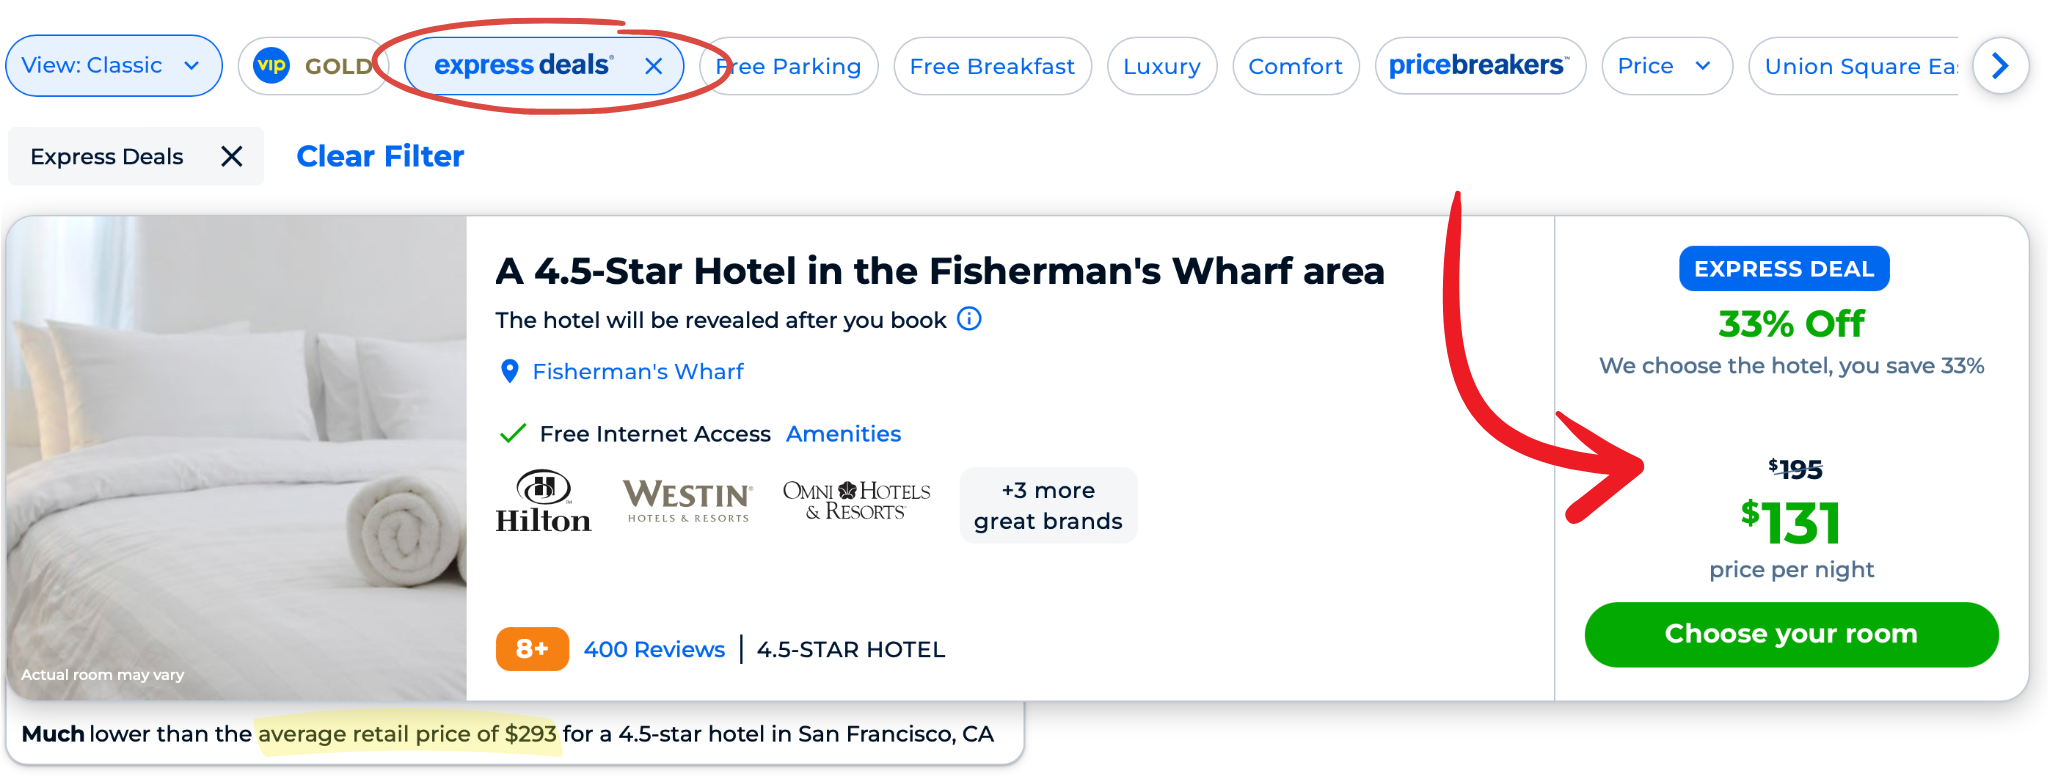 Screenshot of Express Deal hotel offer from Priceline